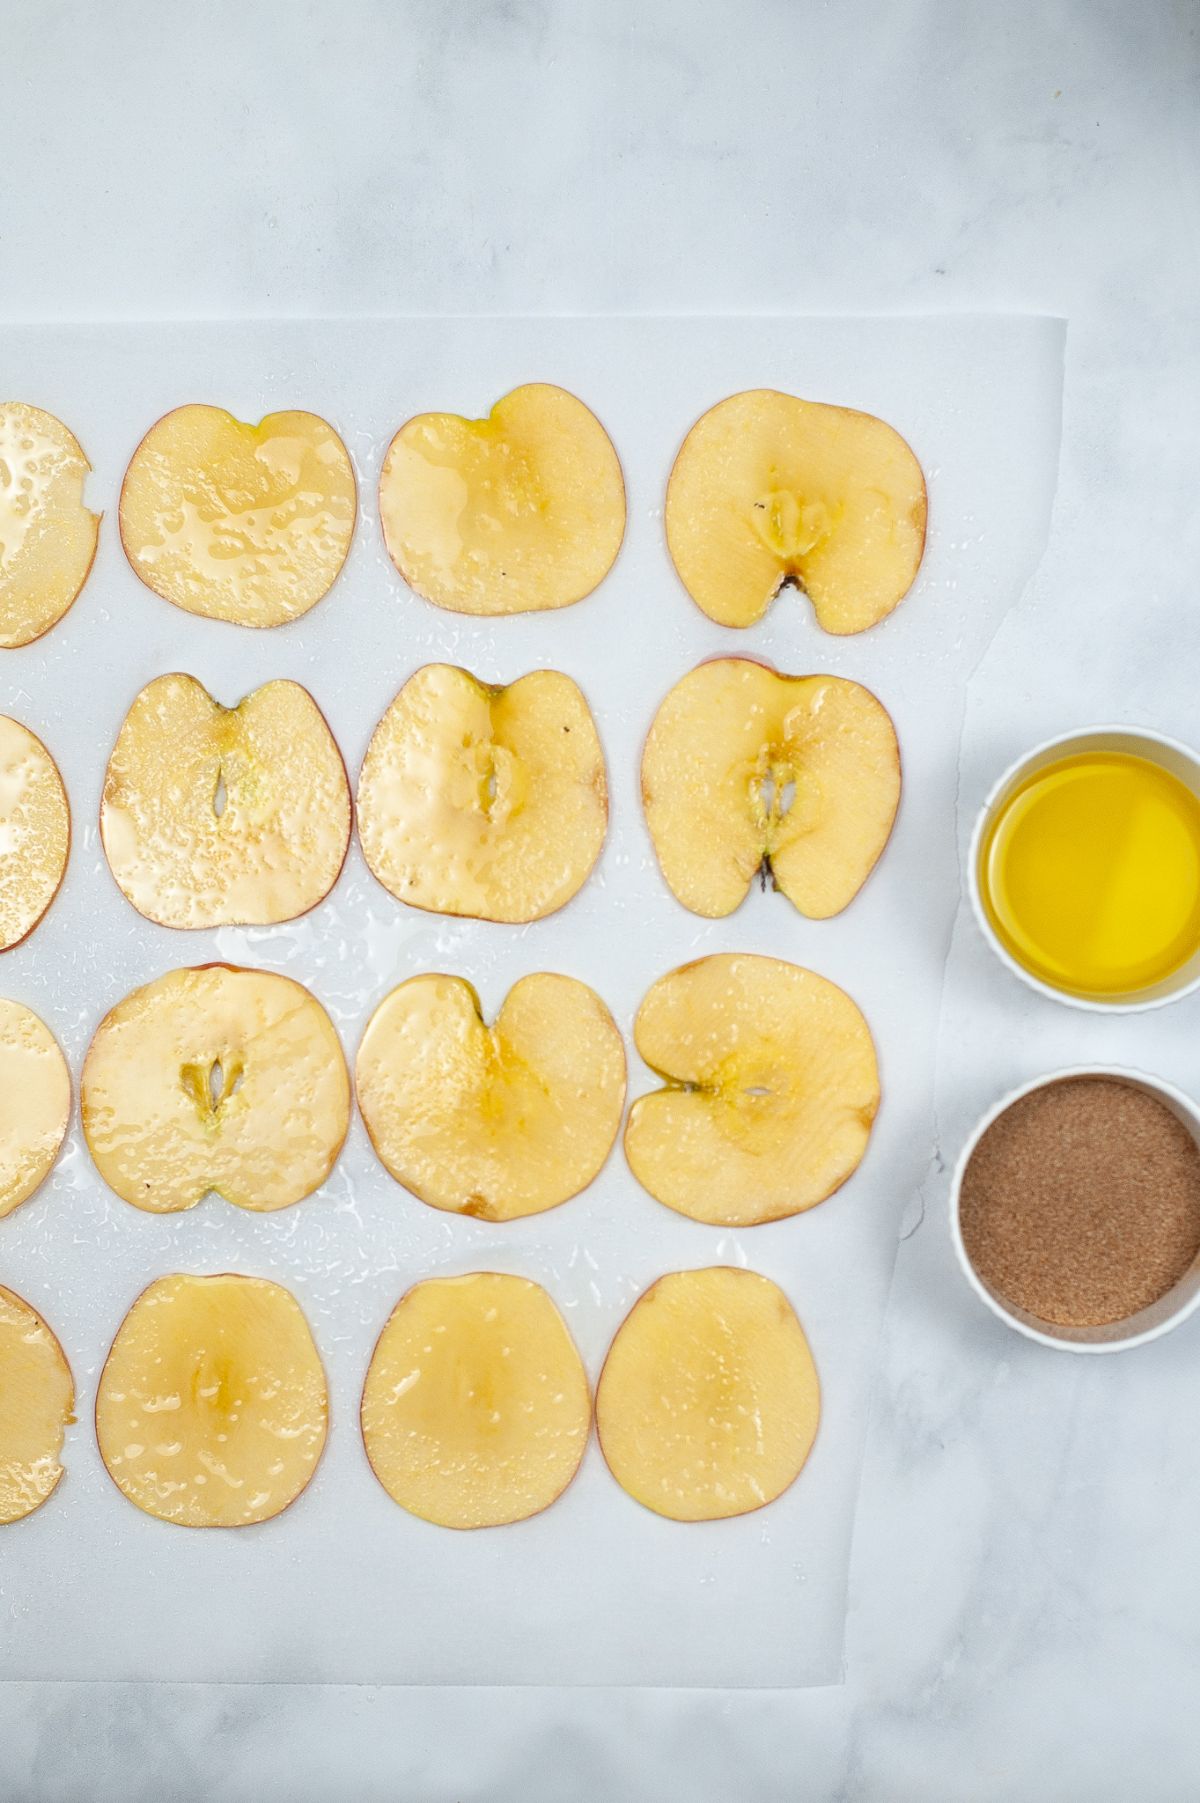 Thin slices of apple on a parchment paper next to bowls of oil and cinnamon